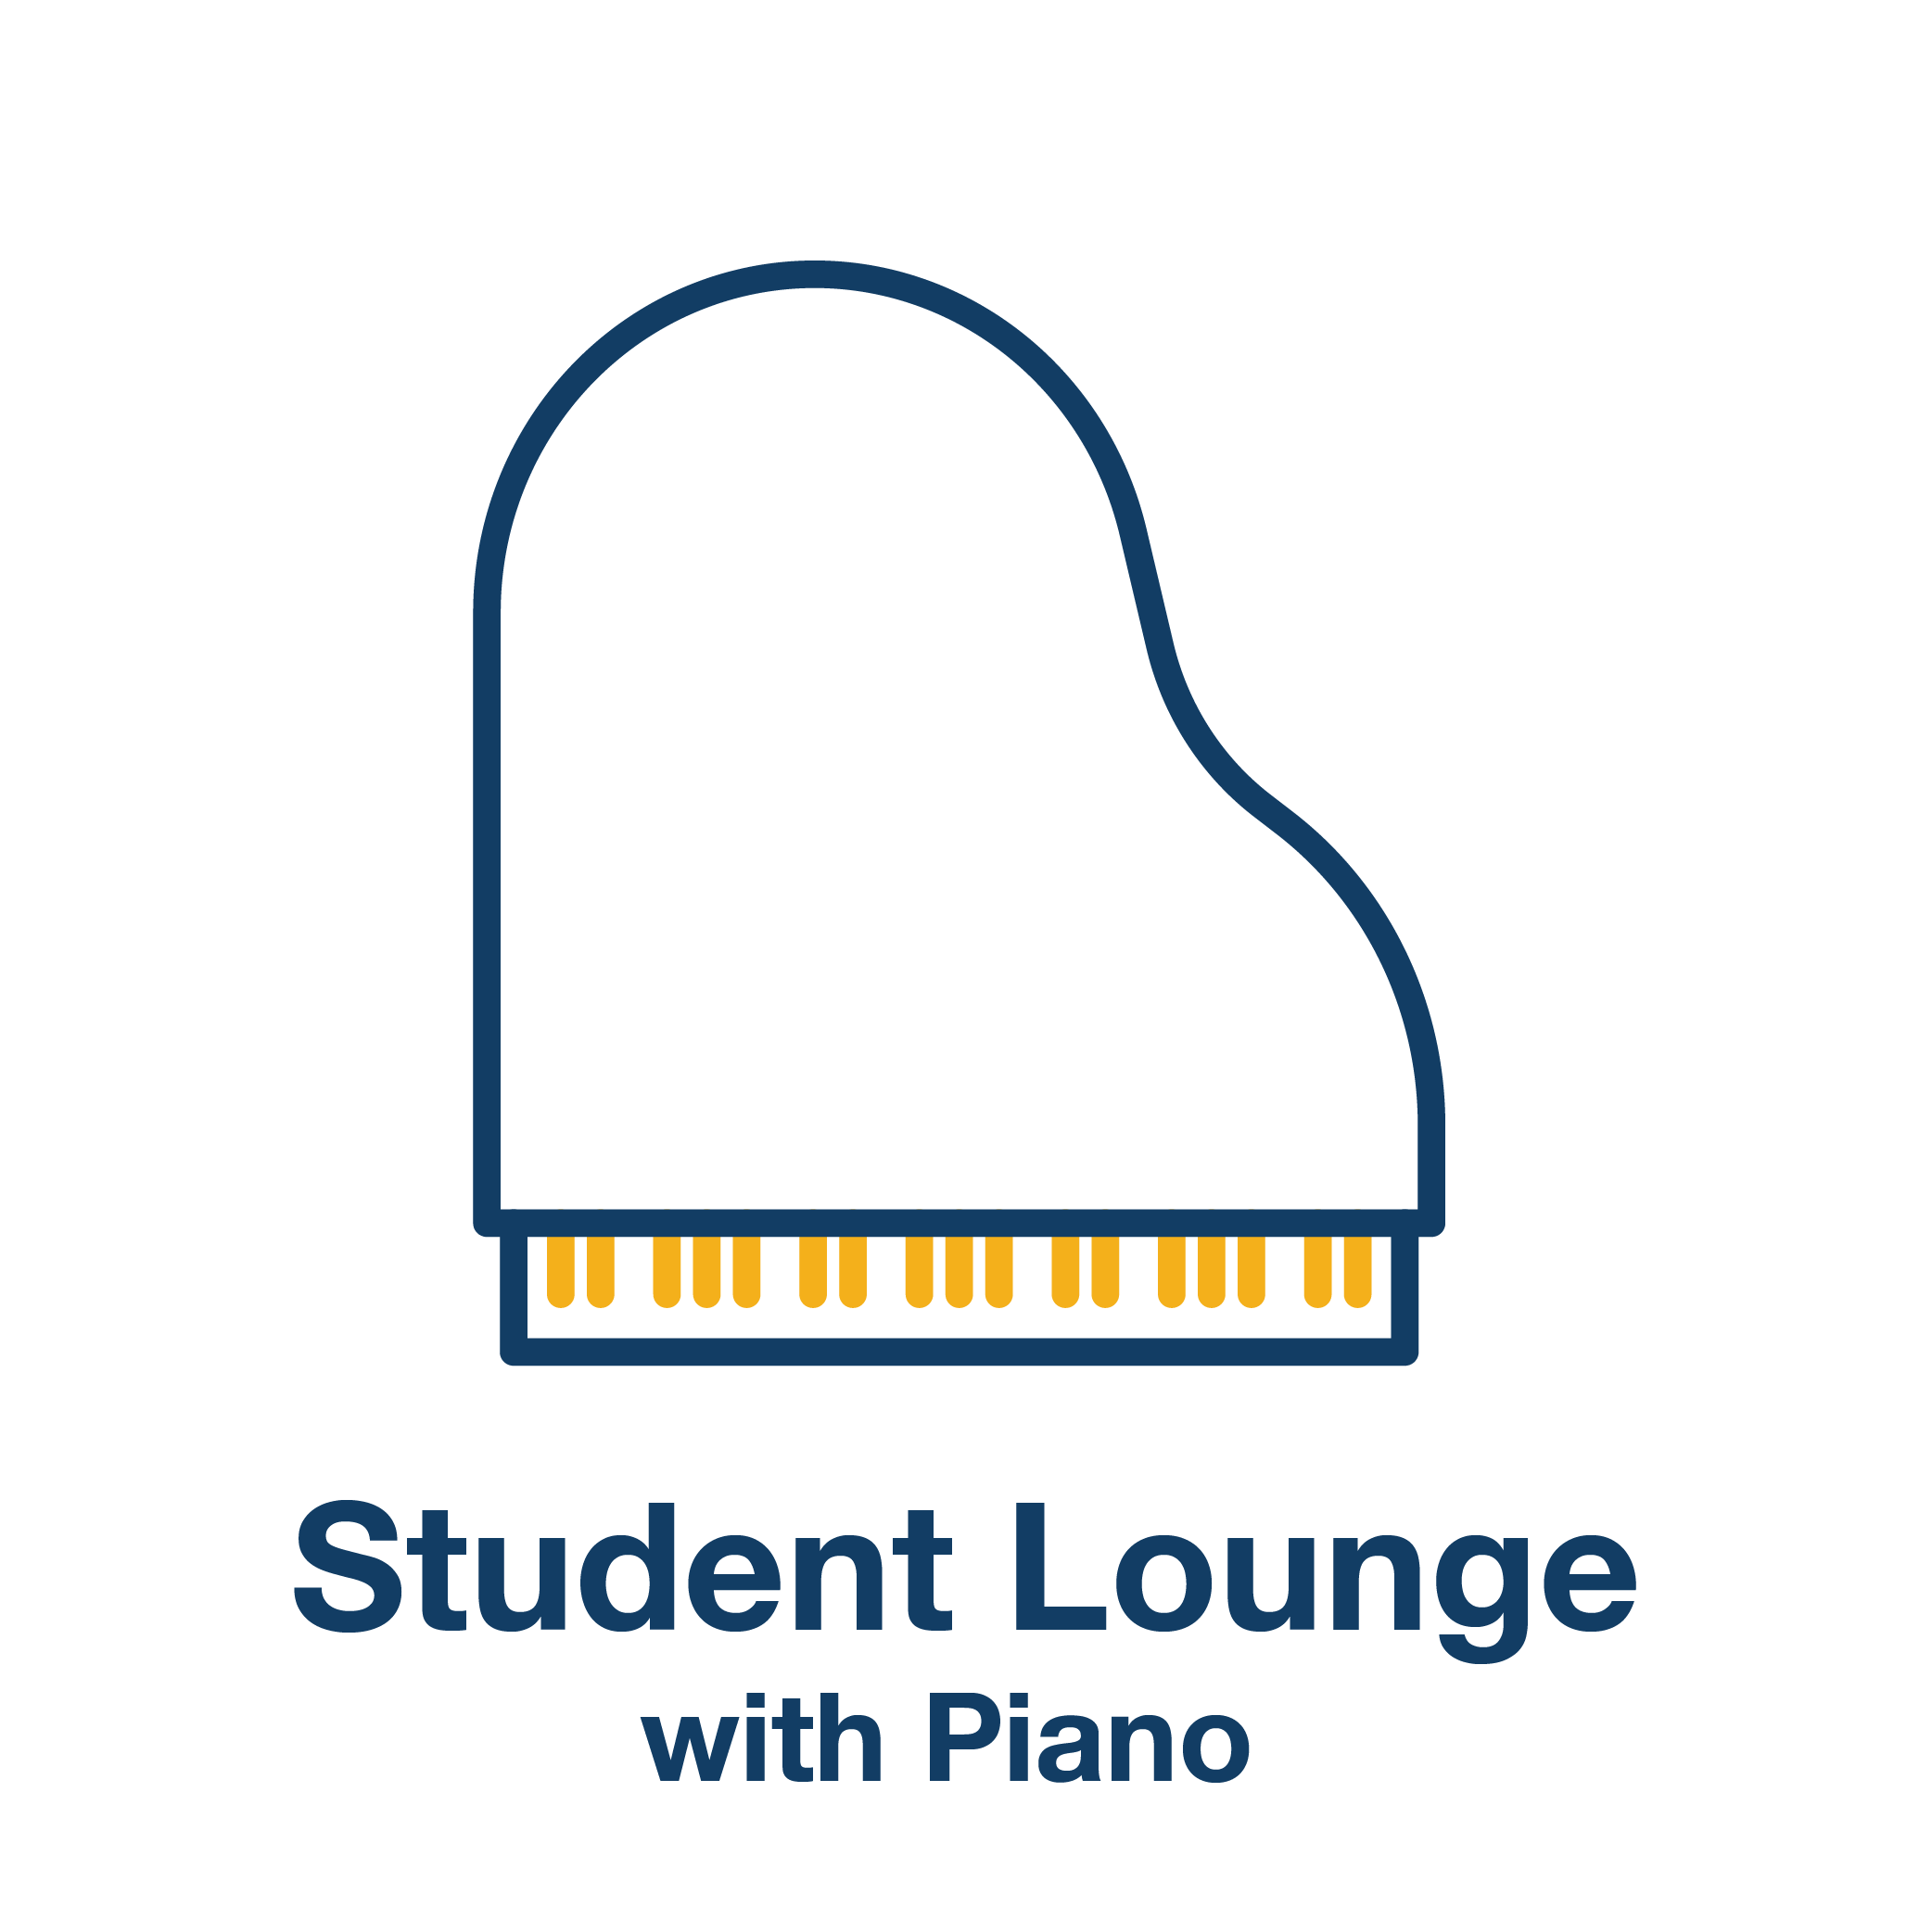 Student Lounge with Piano